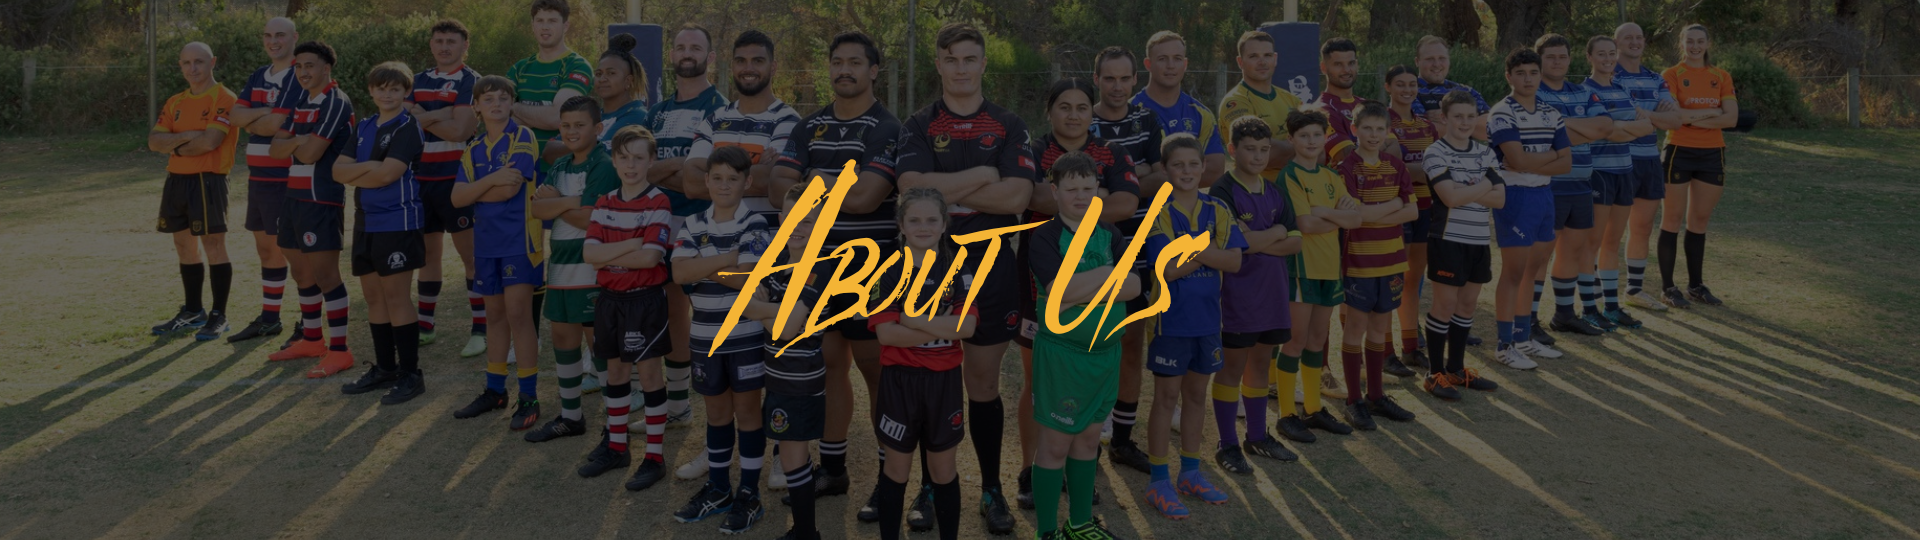 RugbyWA - about us tile